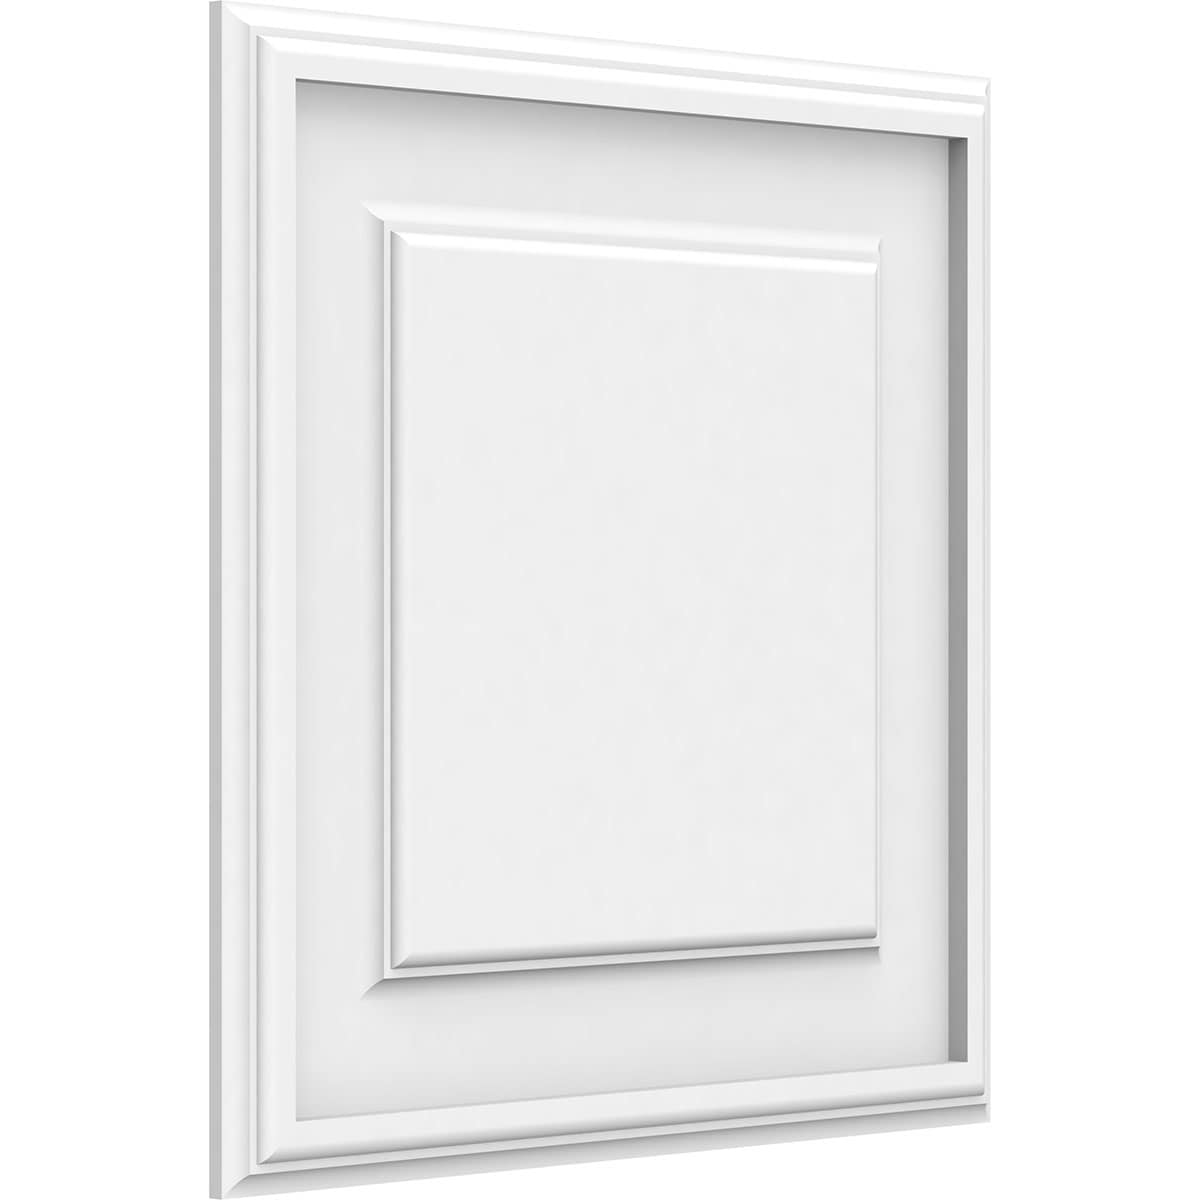 Ekena Millwork 16-in x 16-in Smooth White PVC Wainscot Wall Panel in ...